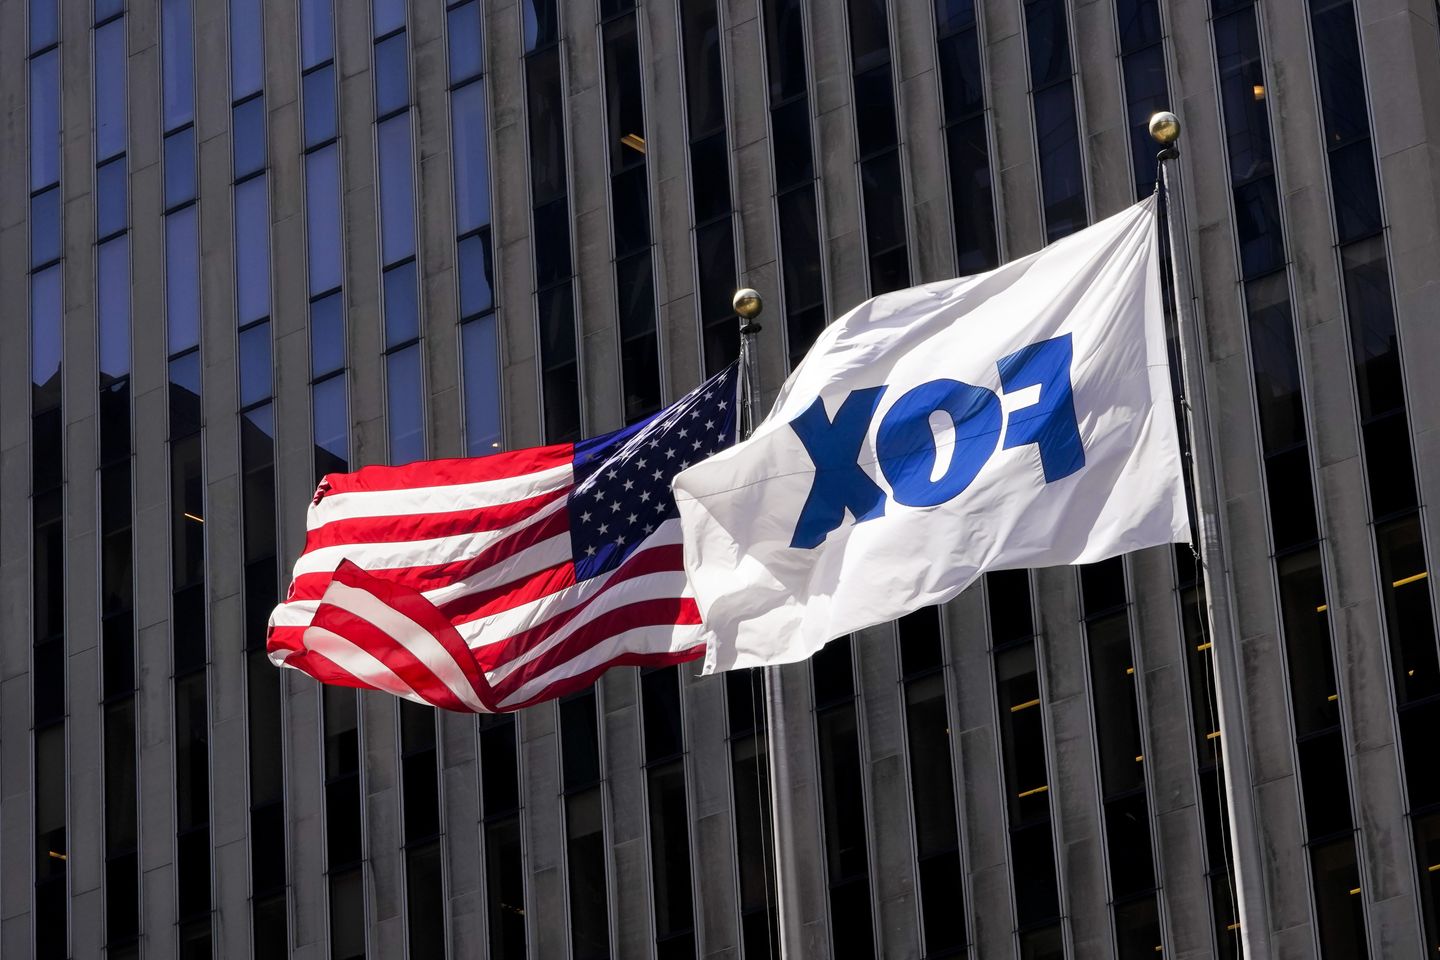 Dominion settlement likely to cost Fox News far less than $787 million